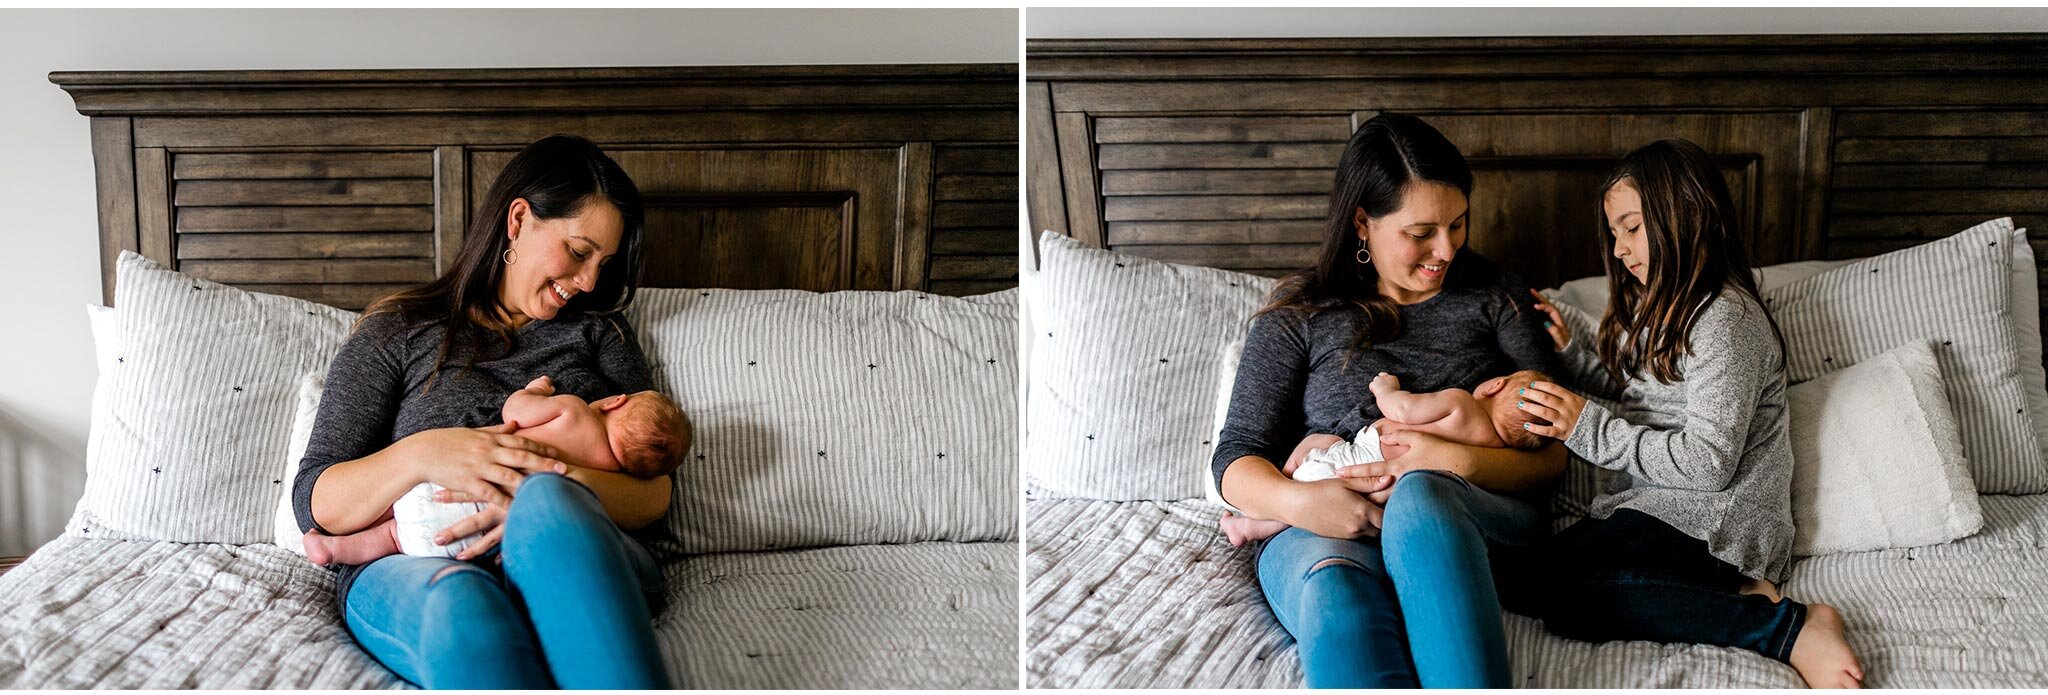 Mother breastfeeding newborn baby on bed | Raleigh Newborn Photographer | By G. Lin Photography